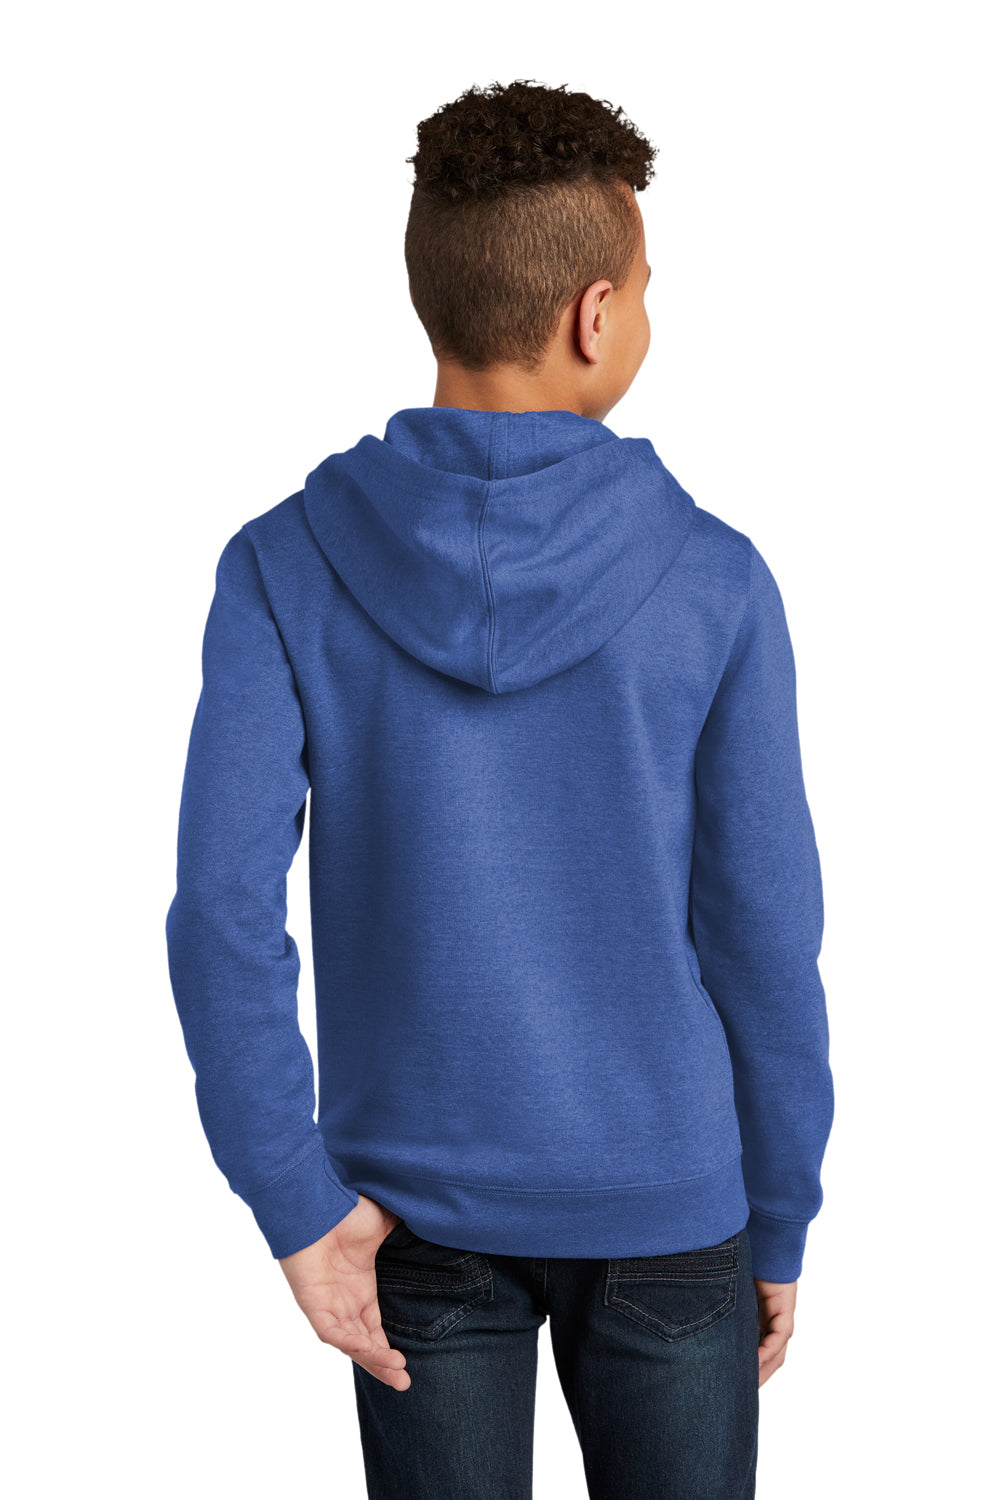 District Youth Very Important Fleece Hooded Sweatshirt Hoodie Royal Blue Frost Side